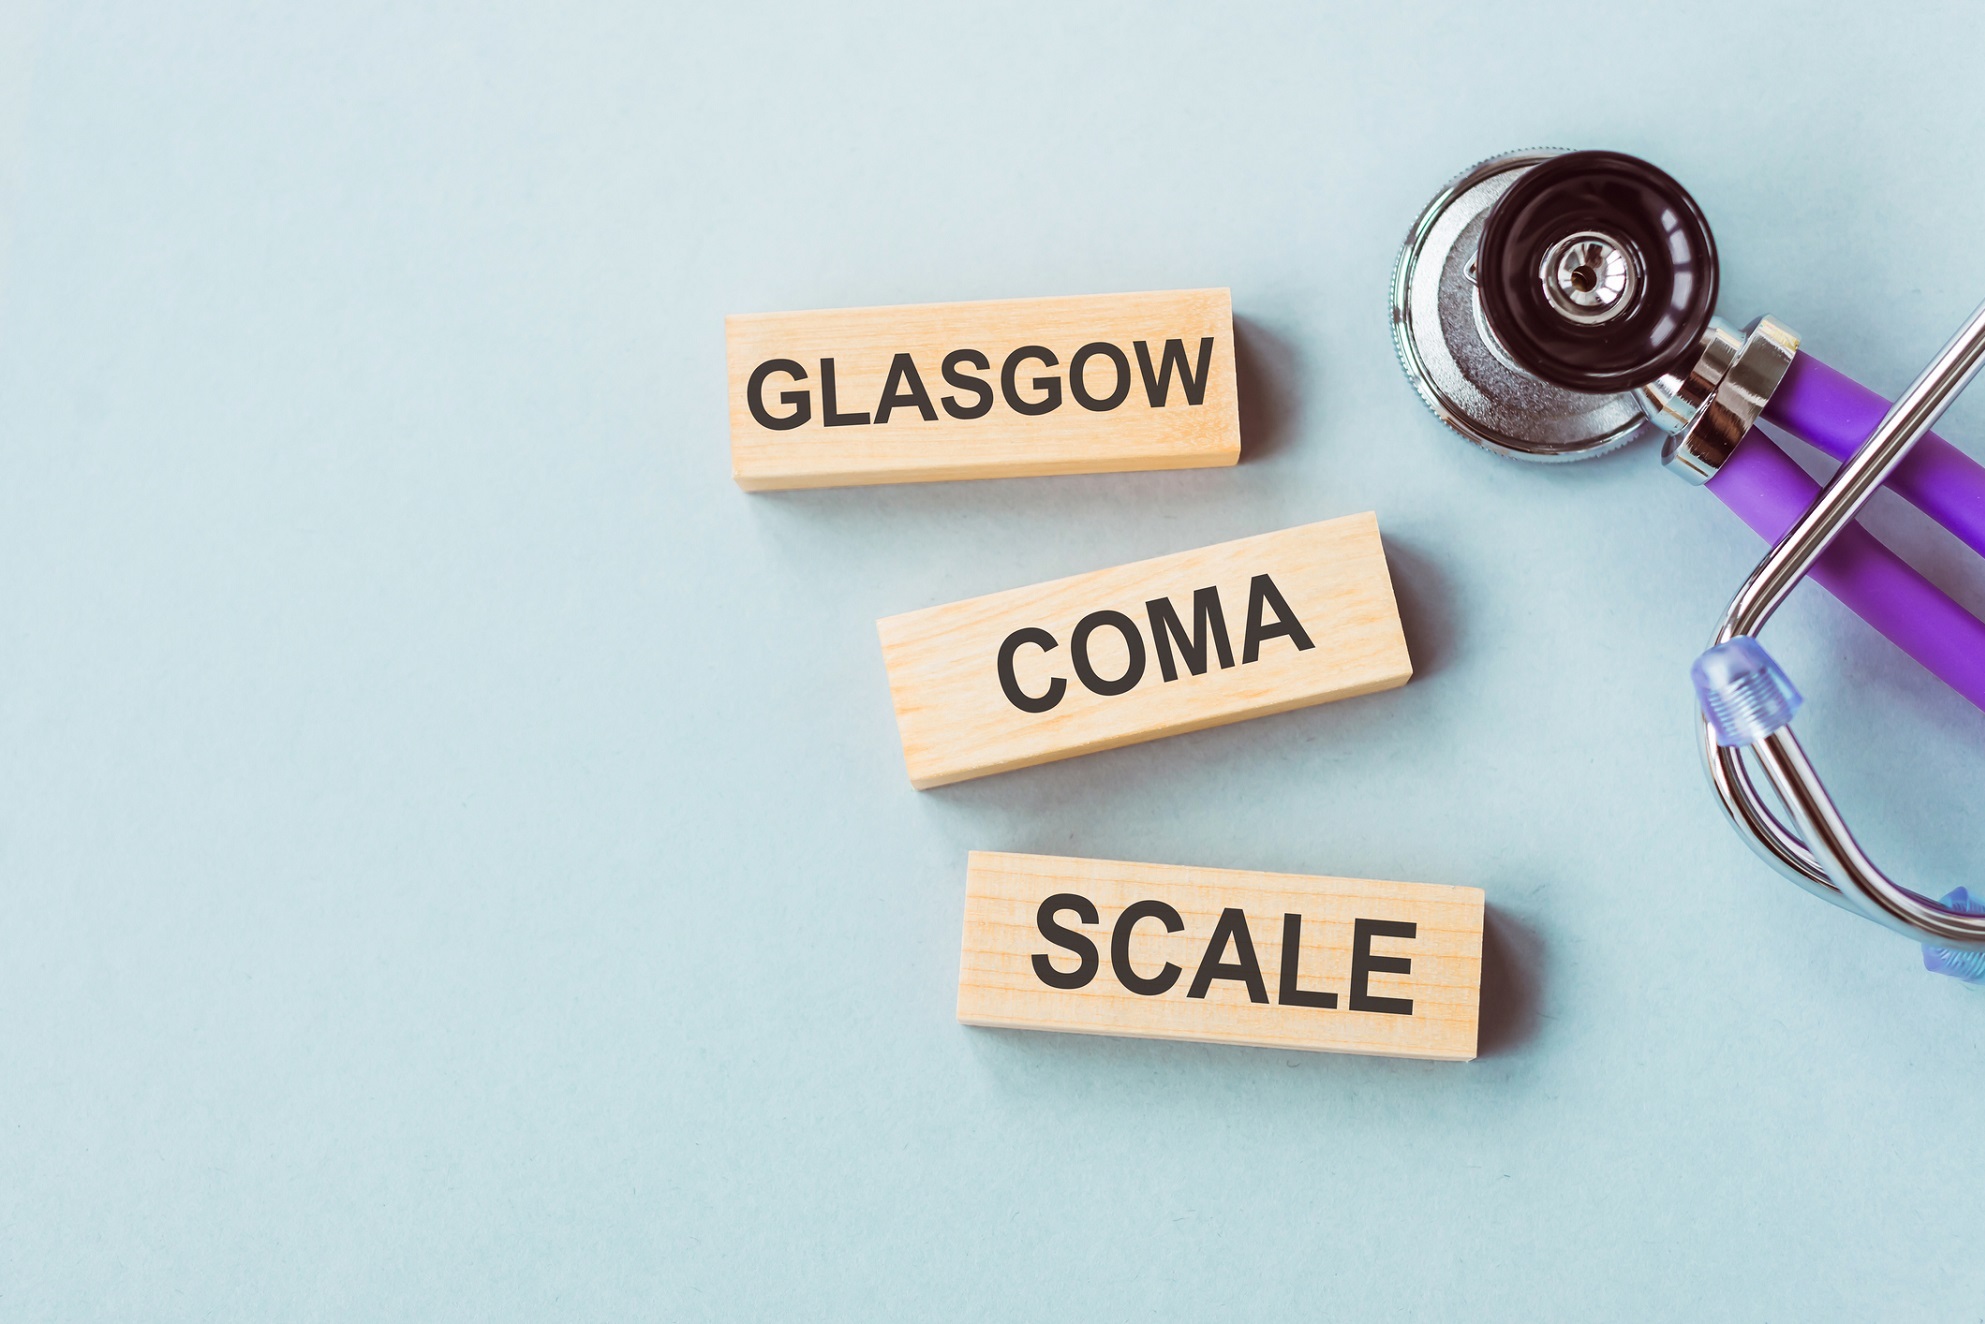 The Glasgow Come Scales measures the consciousness of patients following brain injury.